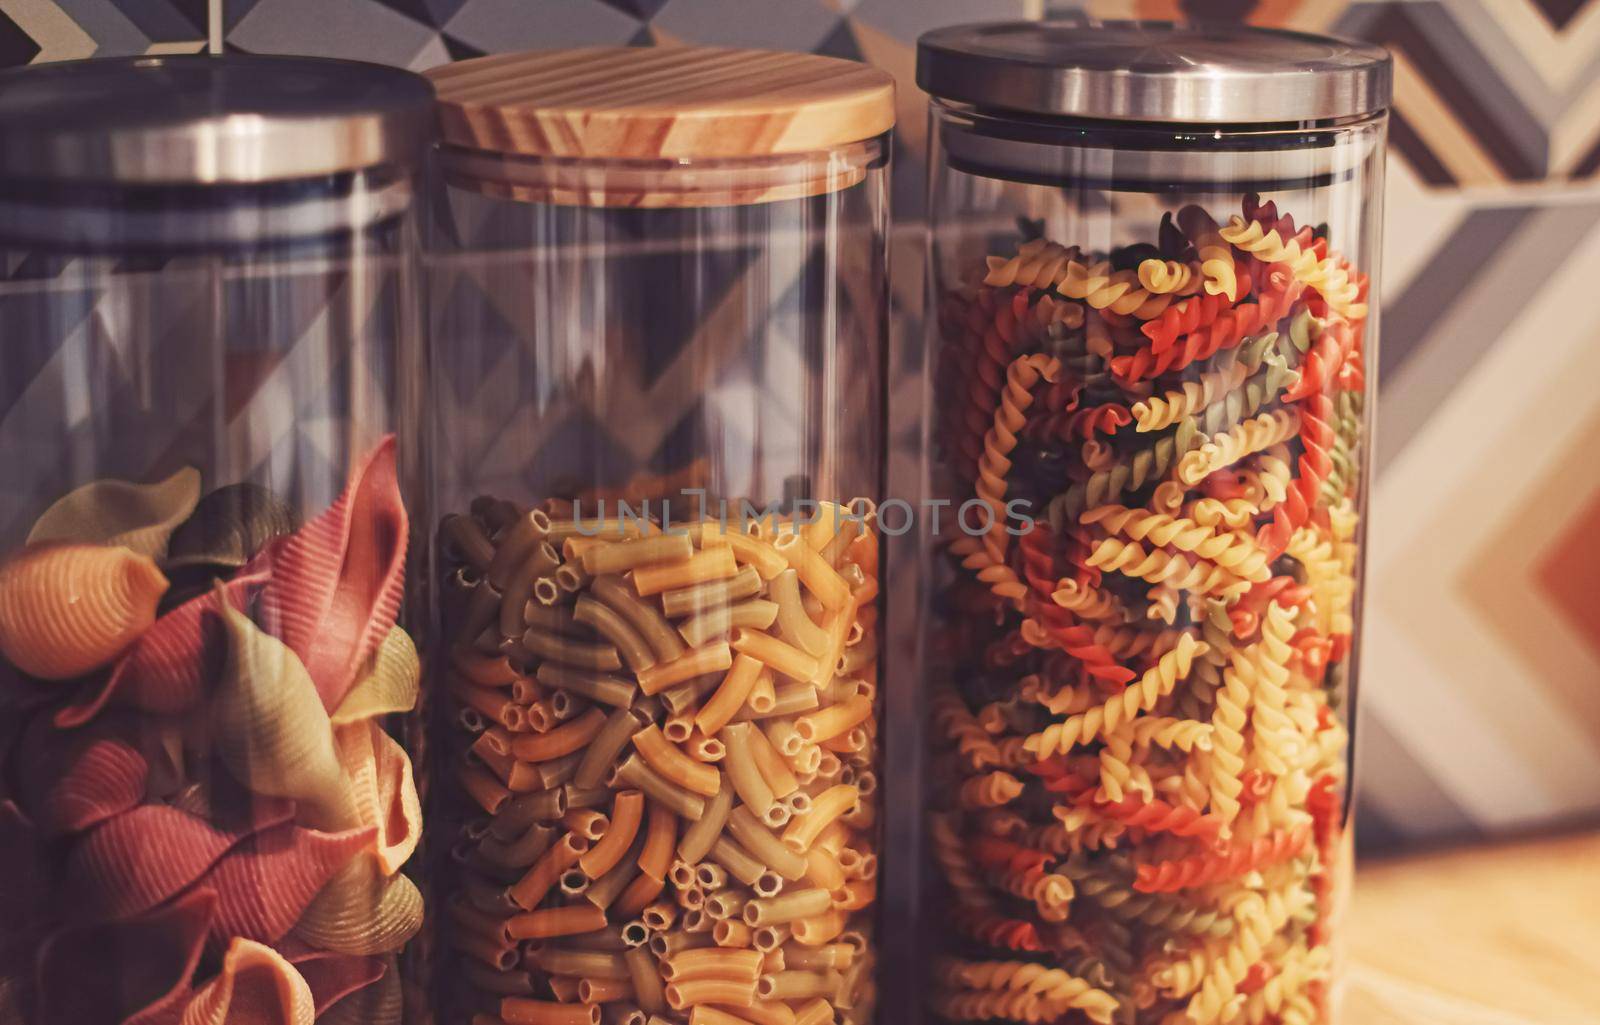 Pasta in dry food storage containers in the kitchen, pantry organisation and home decor idea